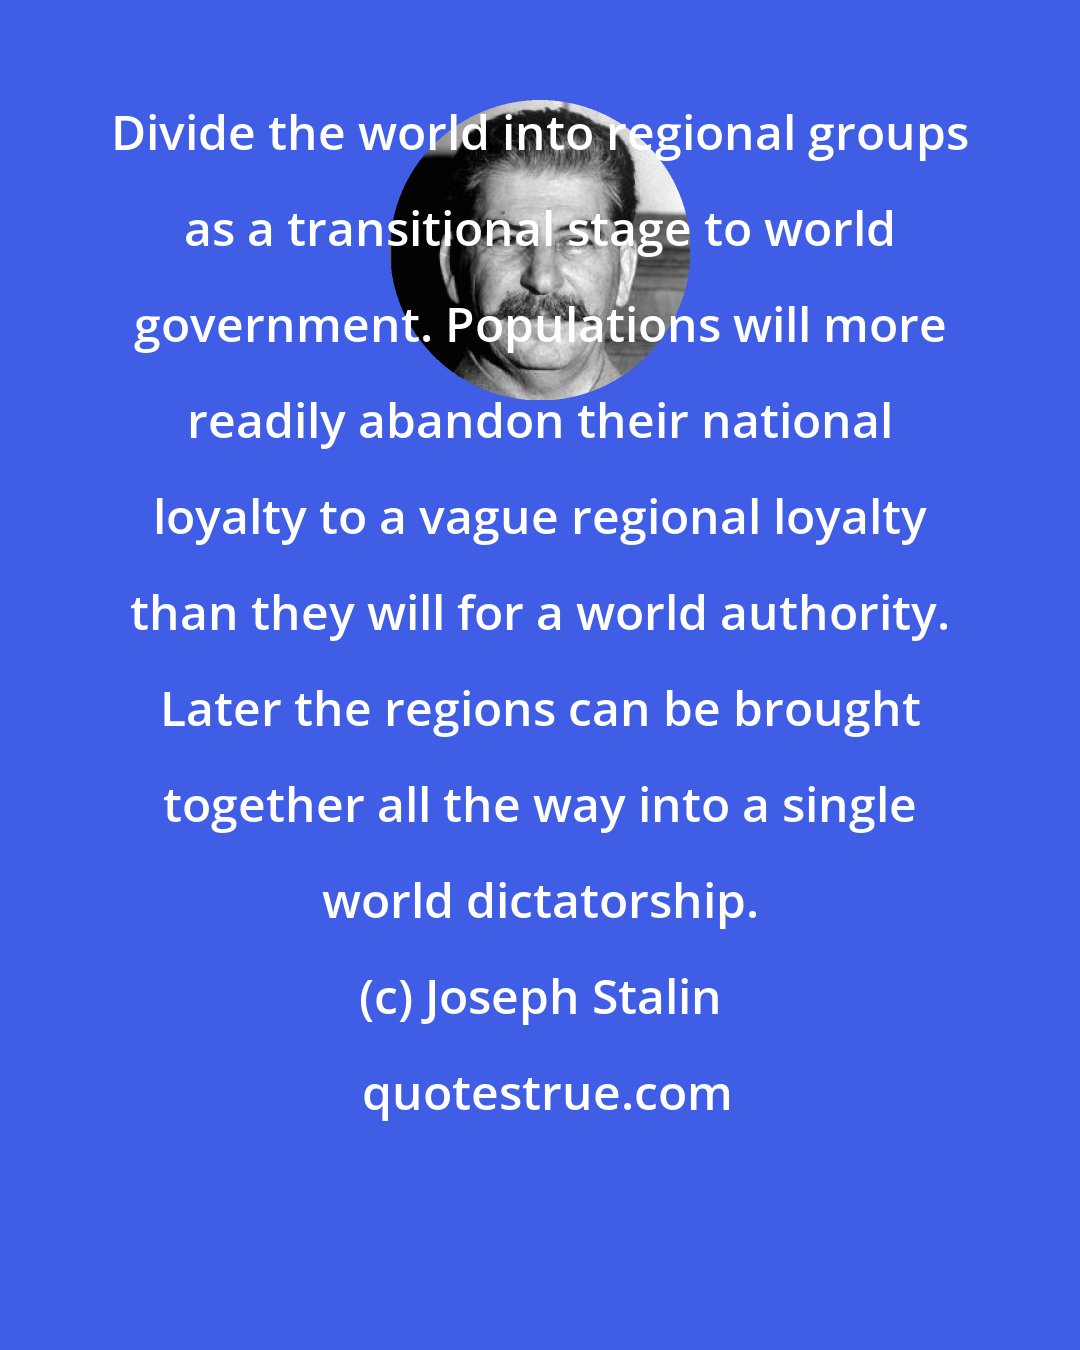 Joseph Stalin: Divide the world into regional groups as a transitional stage to world government. Populations will more readily abandon their national loyalty to a vague regional loyalty than they will for a world authority. Later the regions can be brought together all the way into a single world dictatorship.